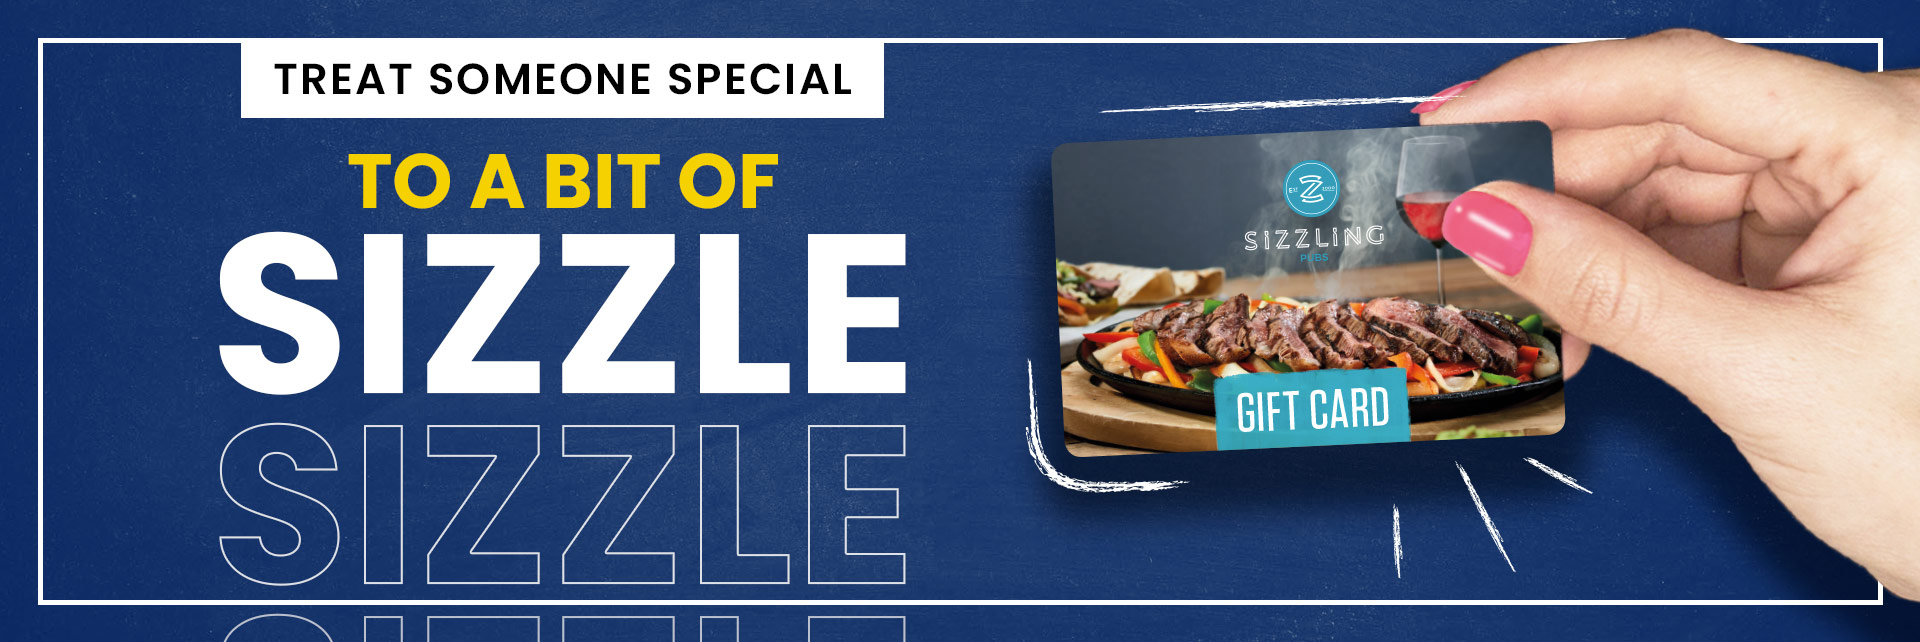 Sizzling Pubs Gift Card at The Armytage Arms in Brighouse